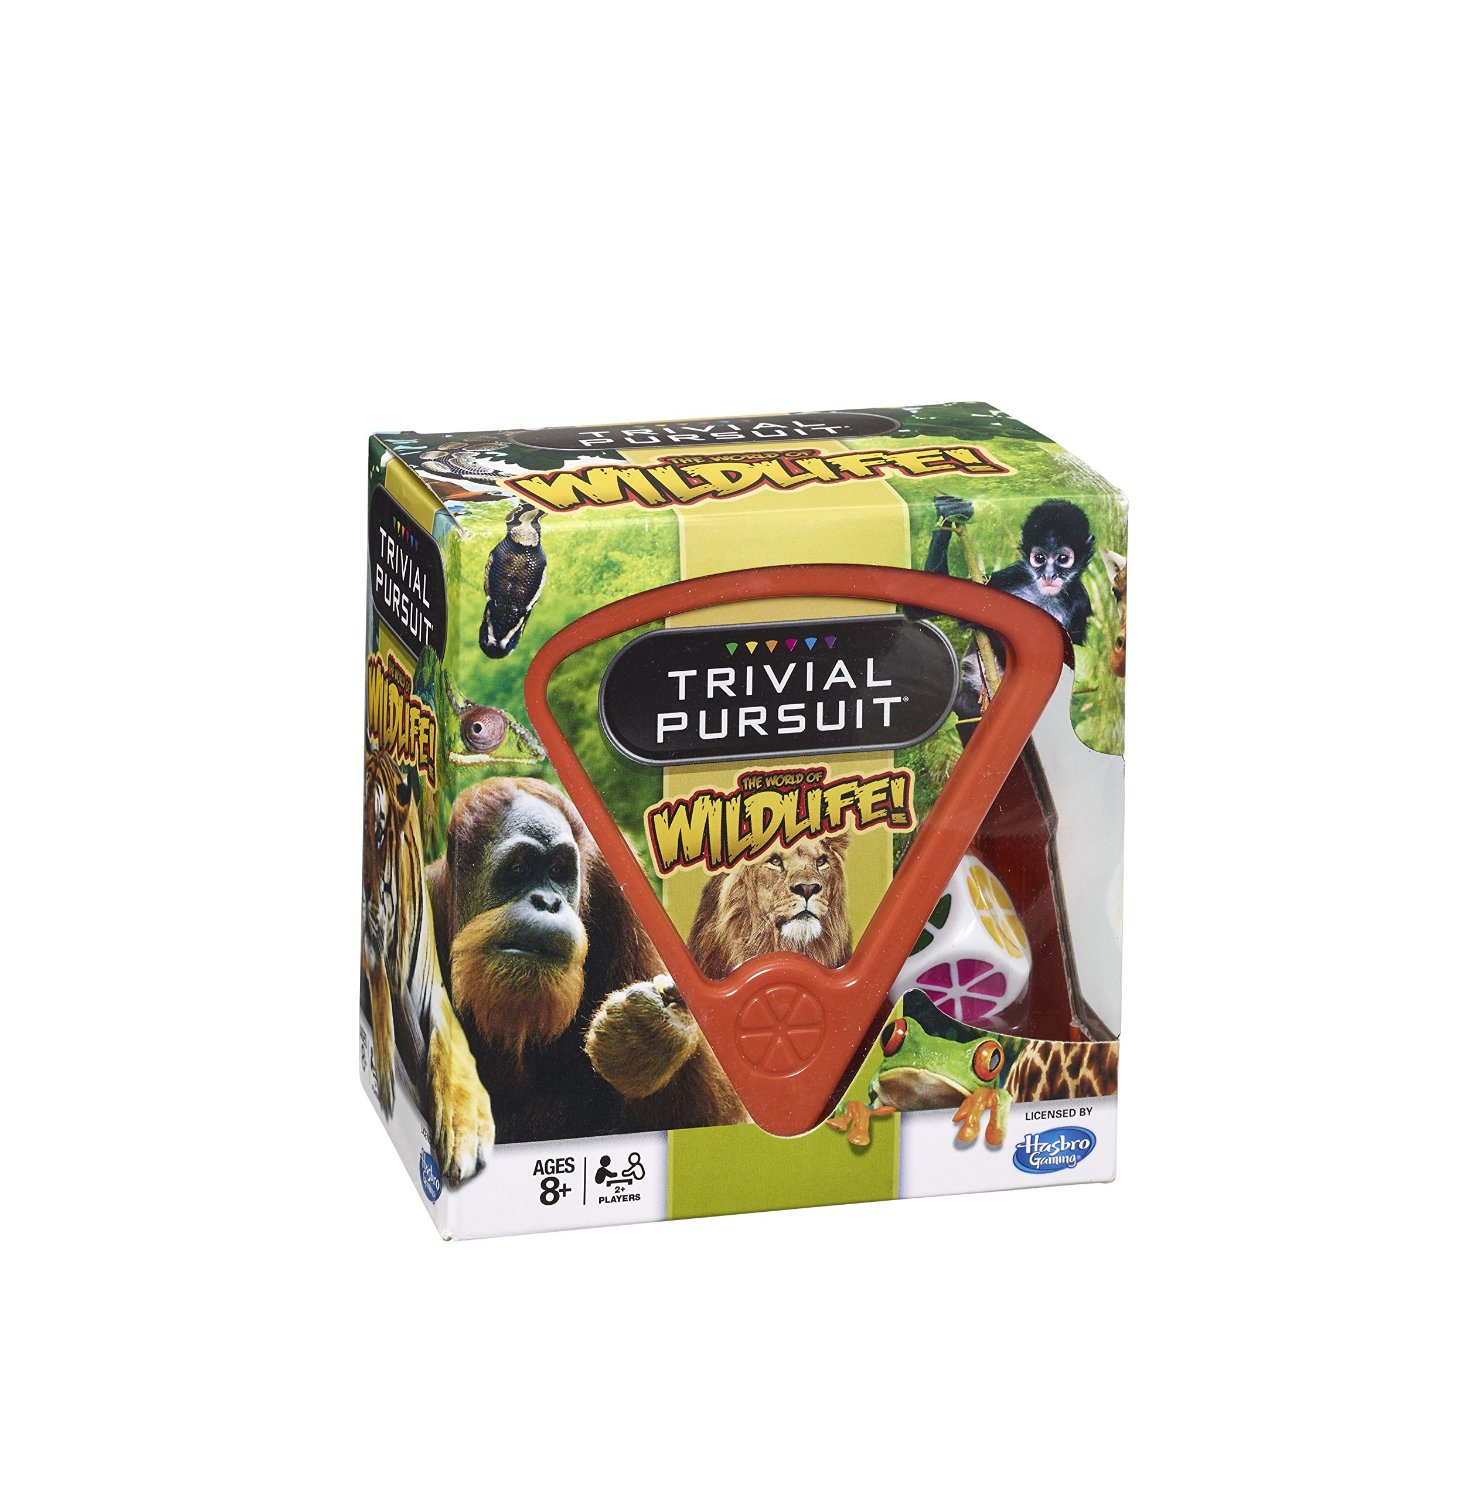 The World of Wildlife 'Trivial Pursuit' Card Game